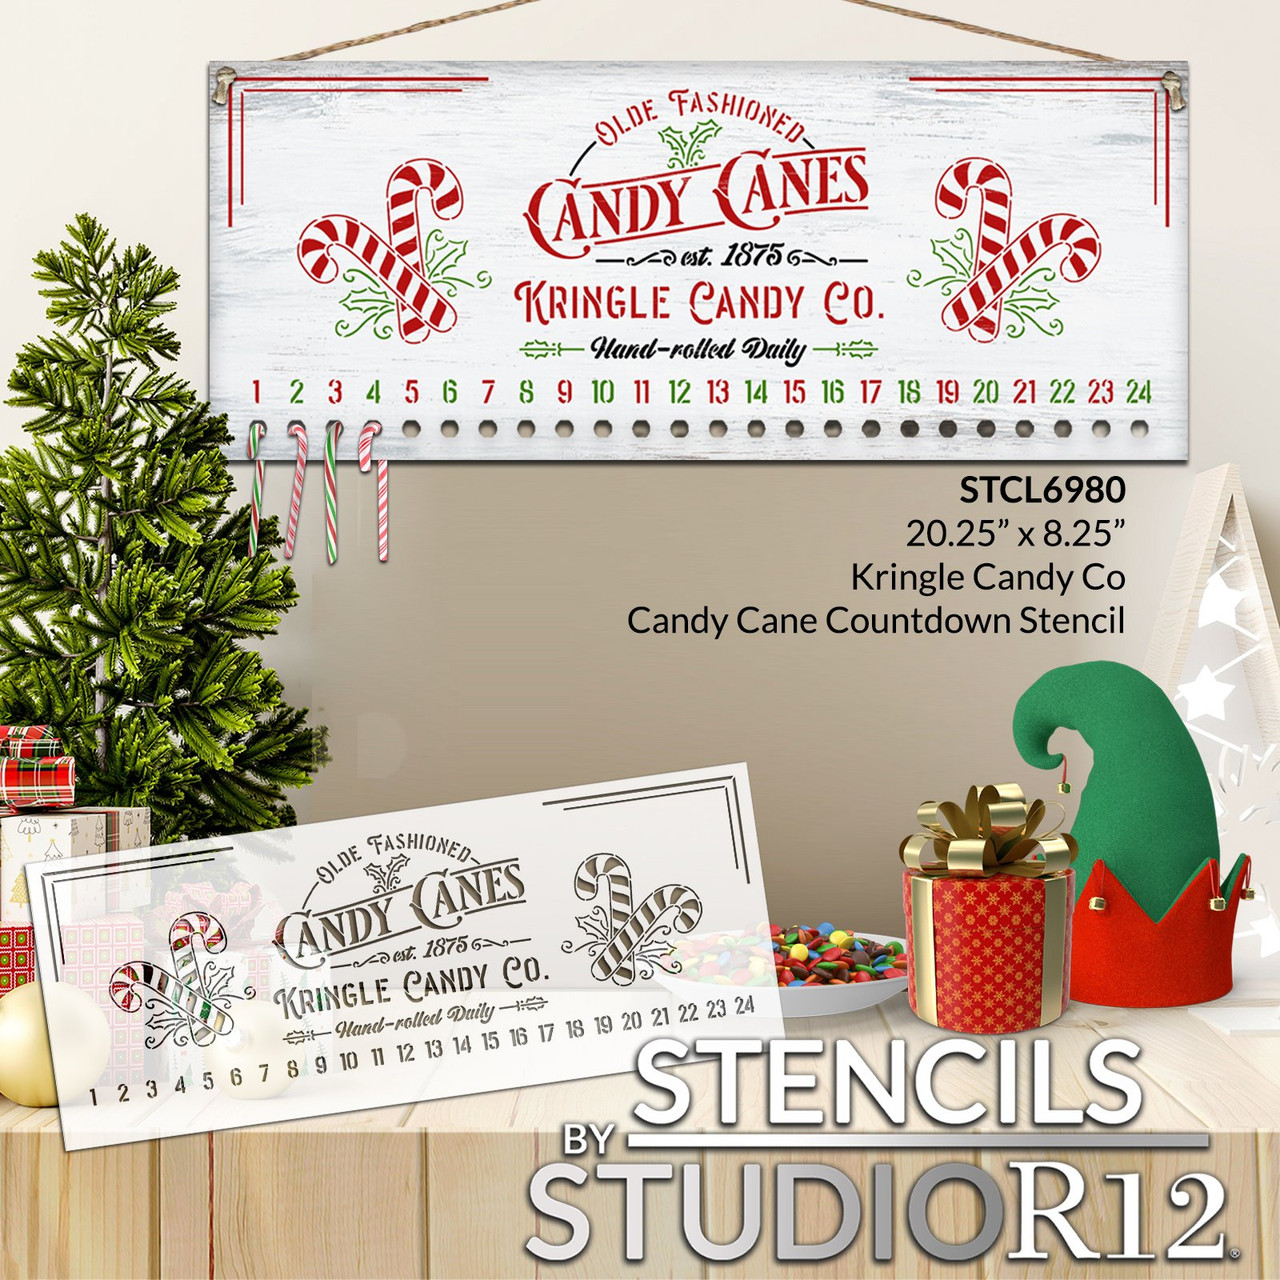 Kringle Candy Cane Countdown Stencil by StudioR12 - USA Made - 20.25 x 8.25 inch - Holiday DIY Christmas Countdown & Advent Calendar | STCL6980